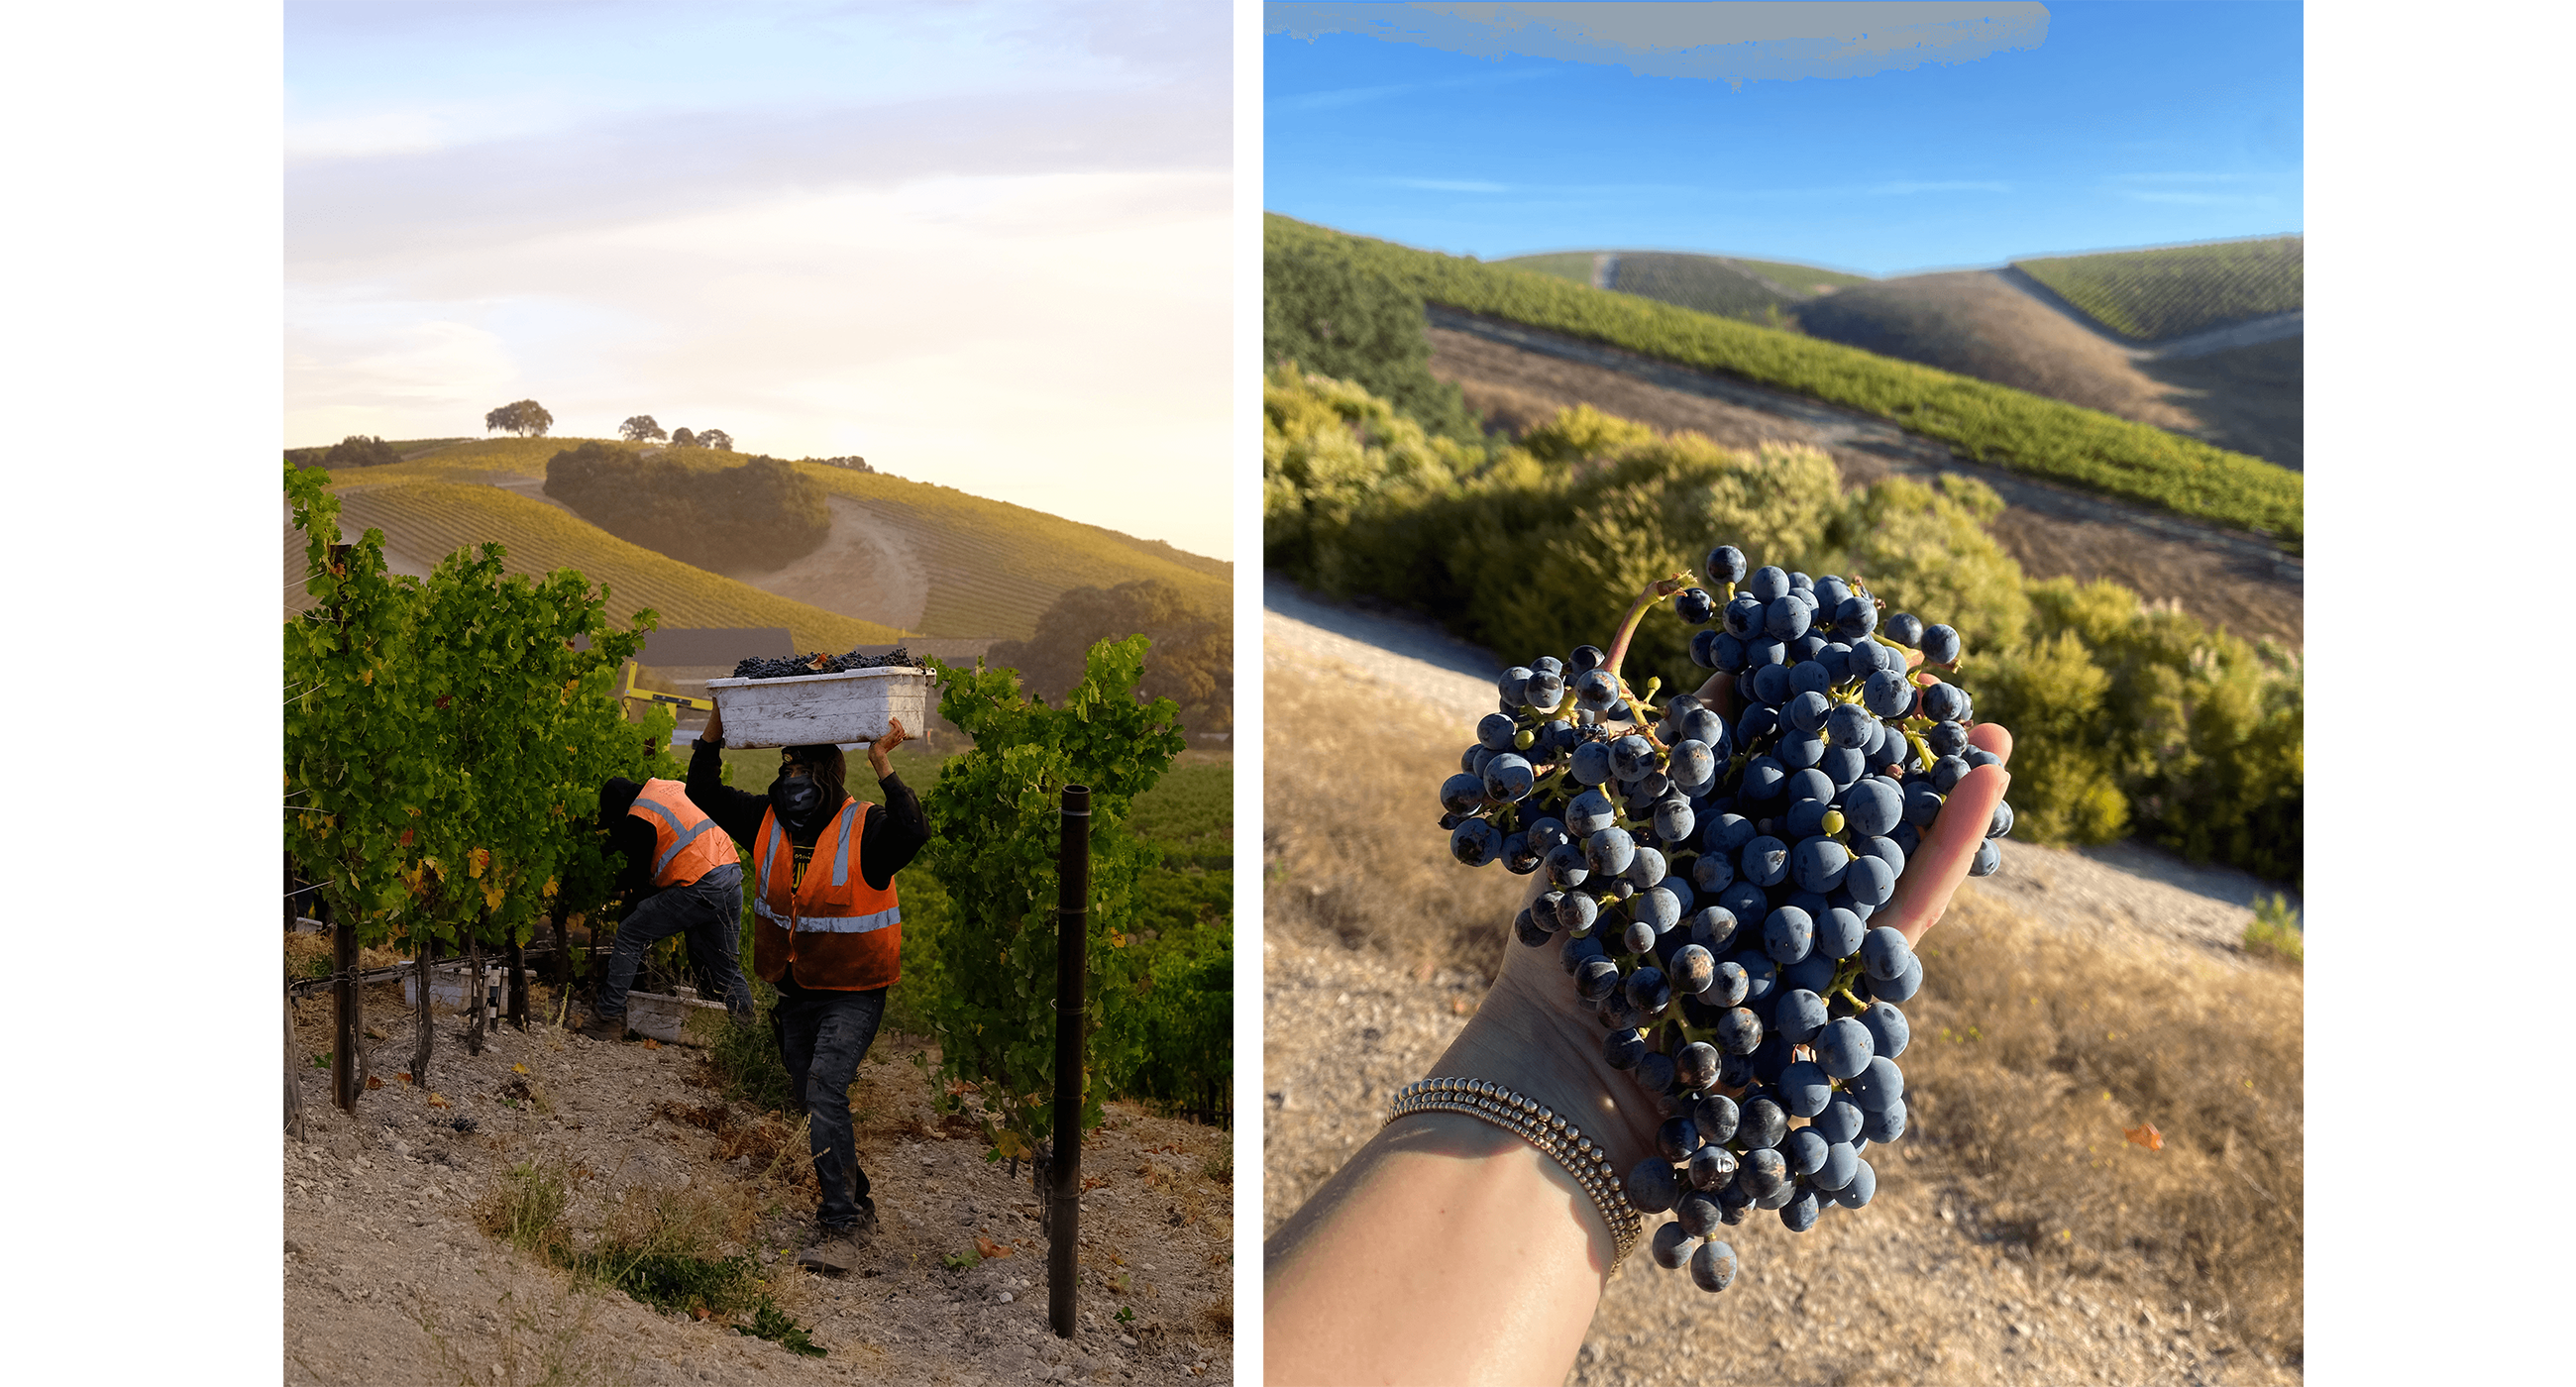 Two photos are shown. On the left a man is carrying a tub of wine grapes above his head while walking through a vineyard with a beautiful sunrise in the background. On the left, two dark blue clusters of Cabernet Sauvignon grapes are held in someone's hand in front of a vineyard.